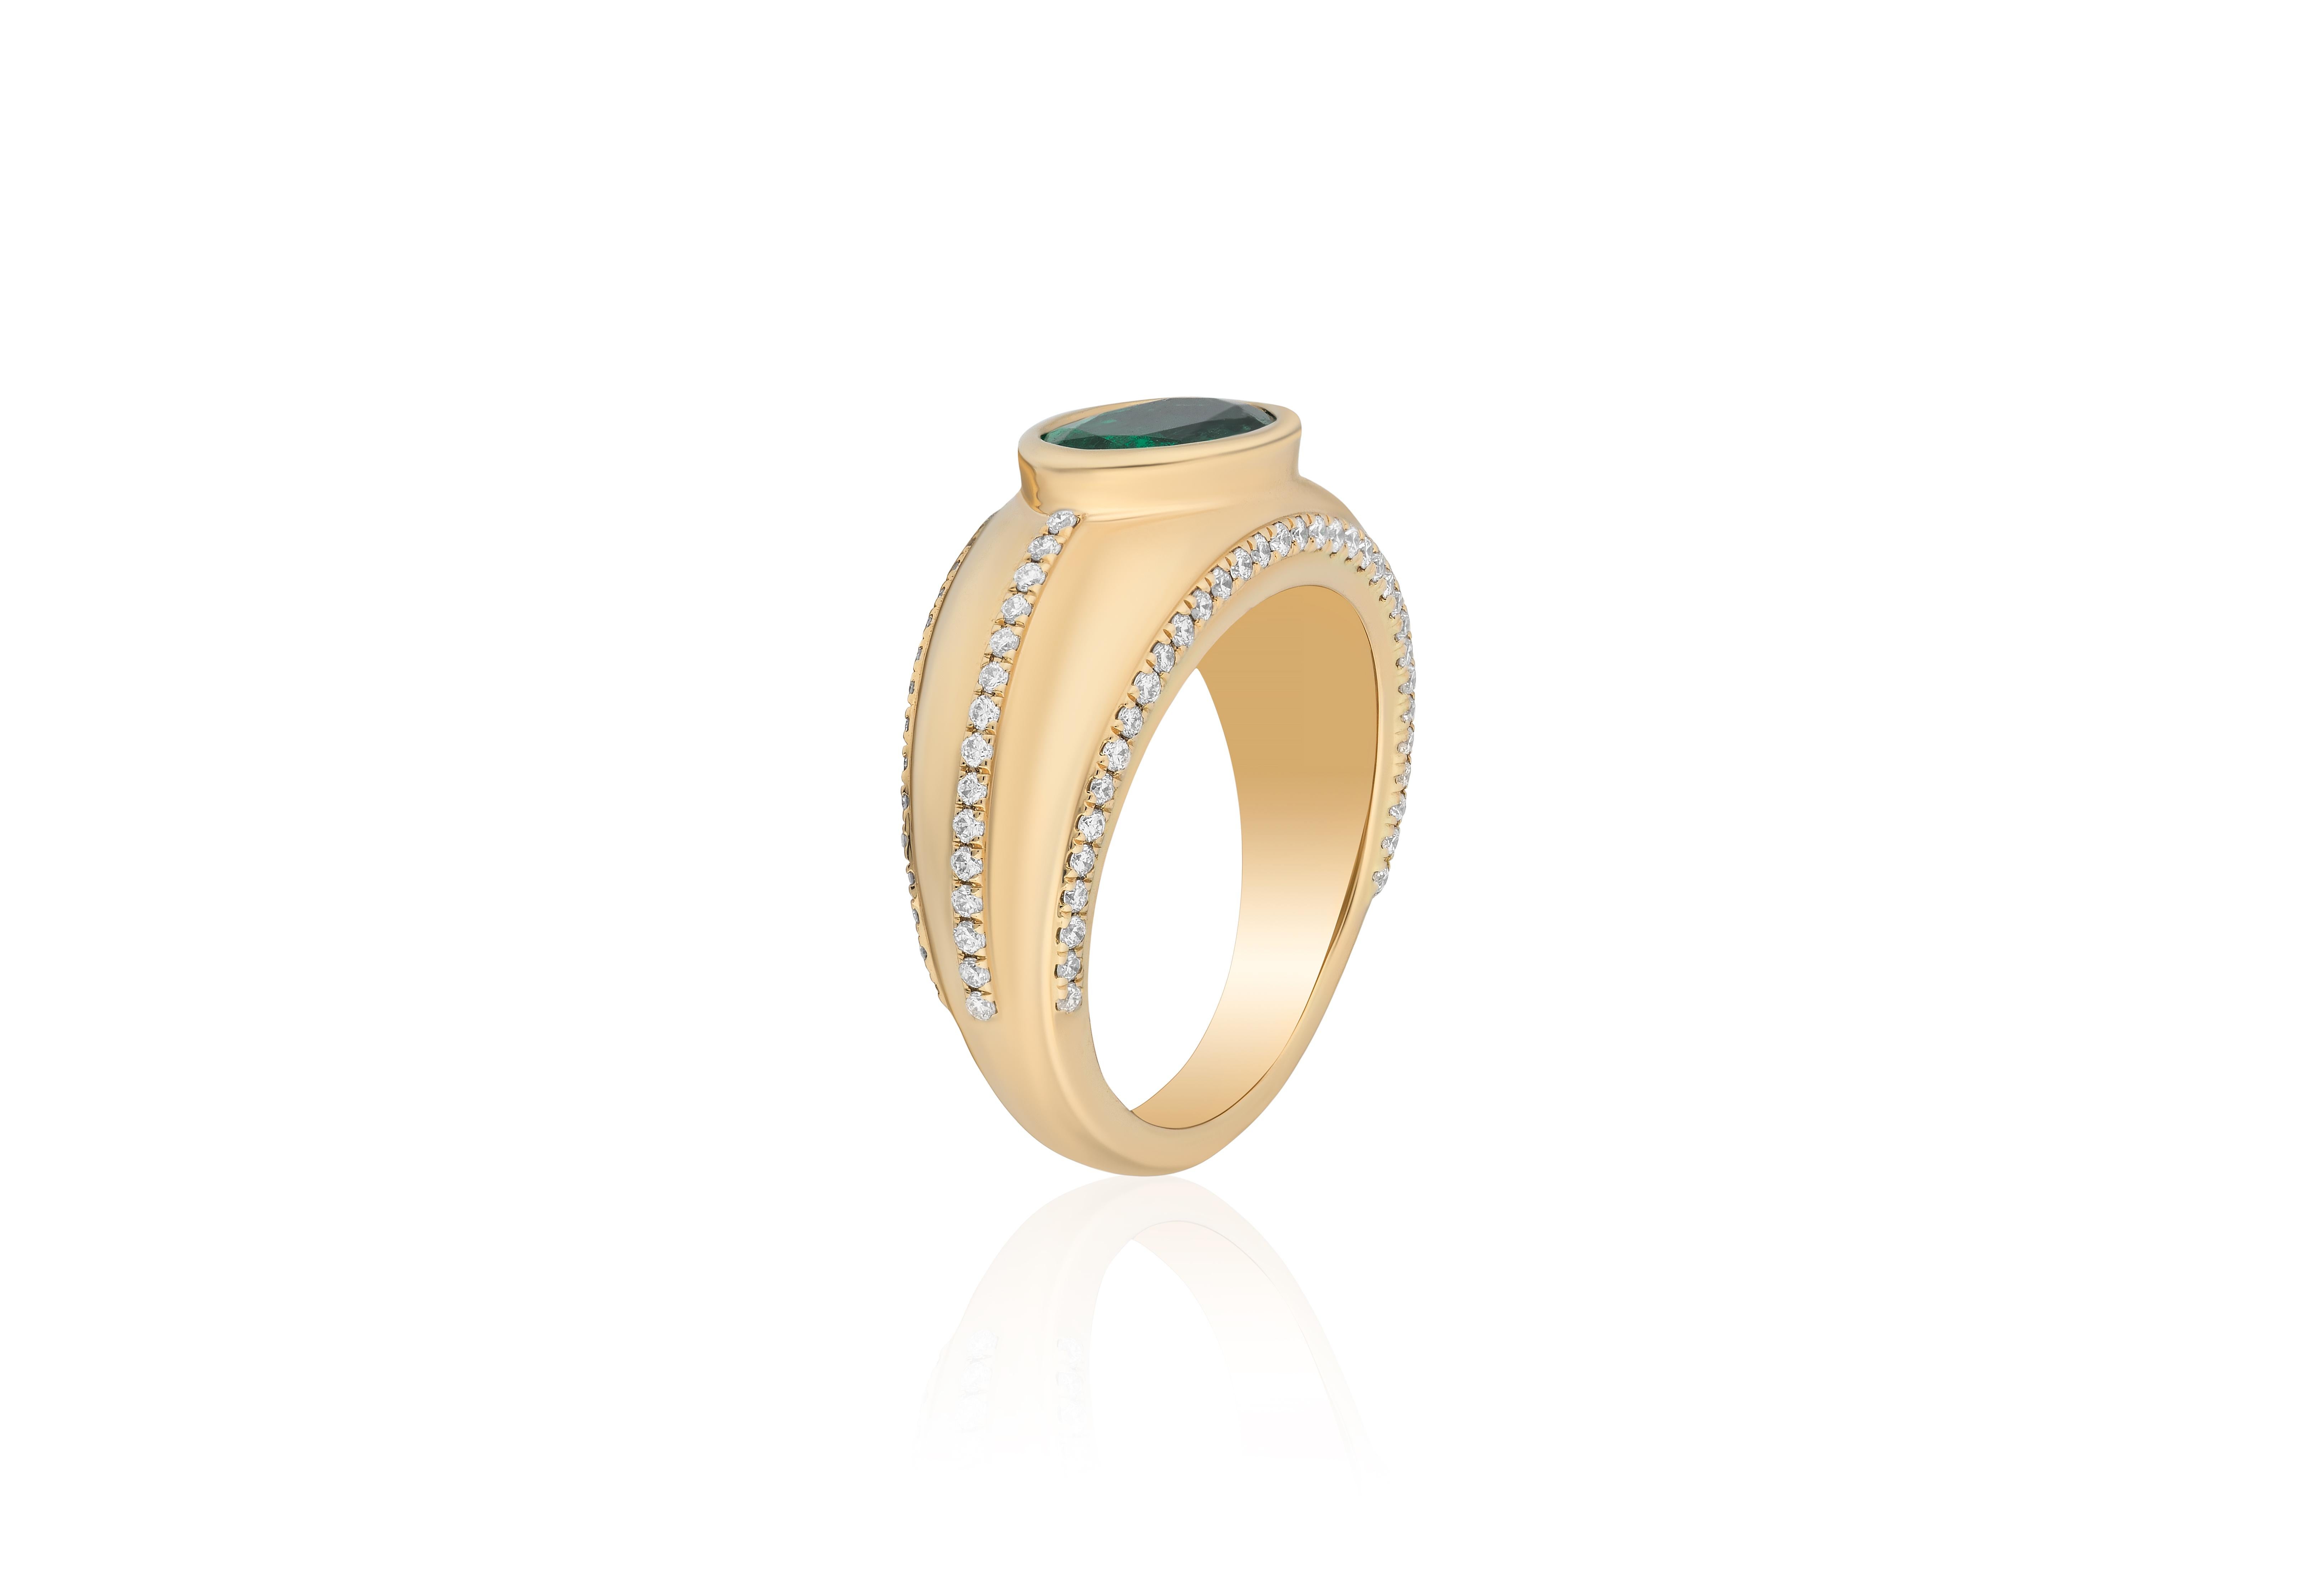 This Emerald Oval Cut Bezel Set Ring with Diamond in 18K Yellow Gold is a stunning piece of jewelry from the 'G-0ne' Collection. Crafted with exquisite attention to detail, this ring showcases a magnificent emerald gemstone in an oval cut, which is